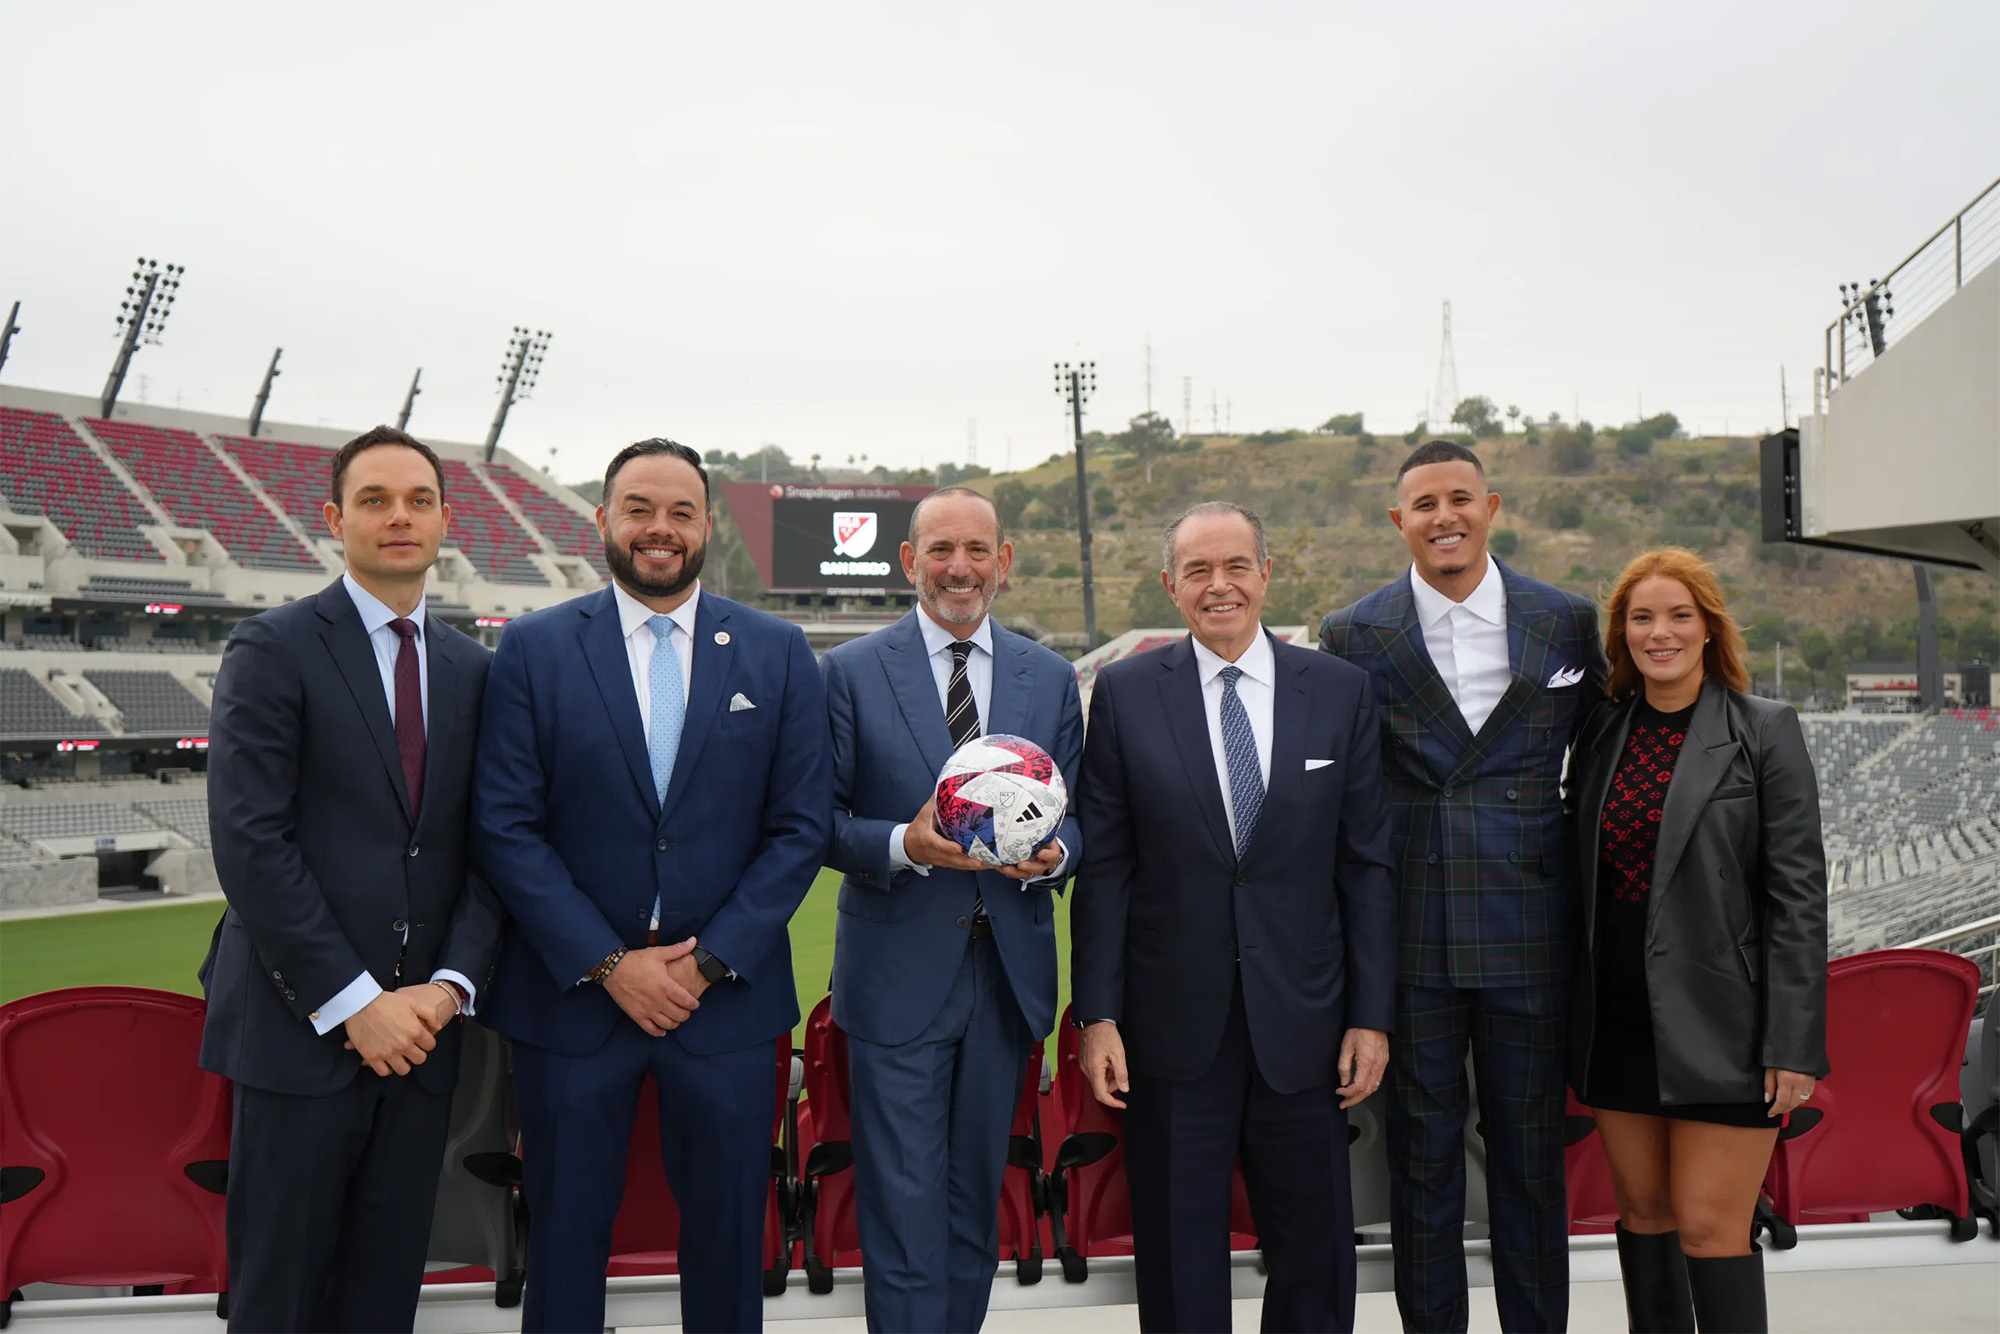 Major league soccer coming to San Diego?